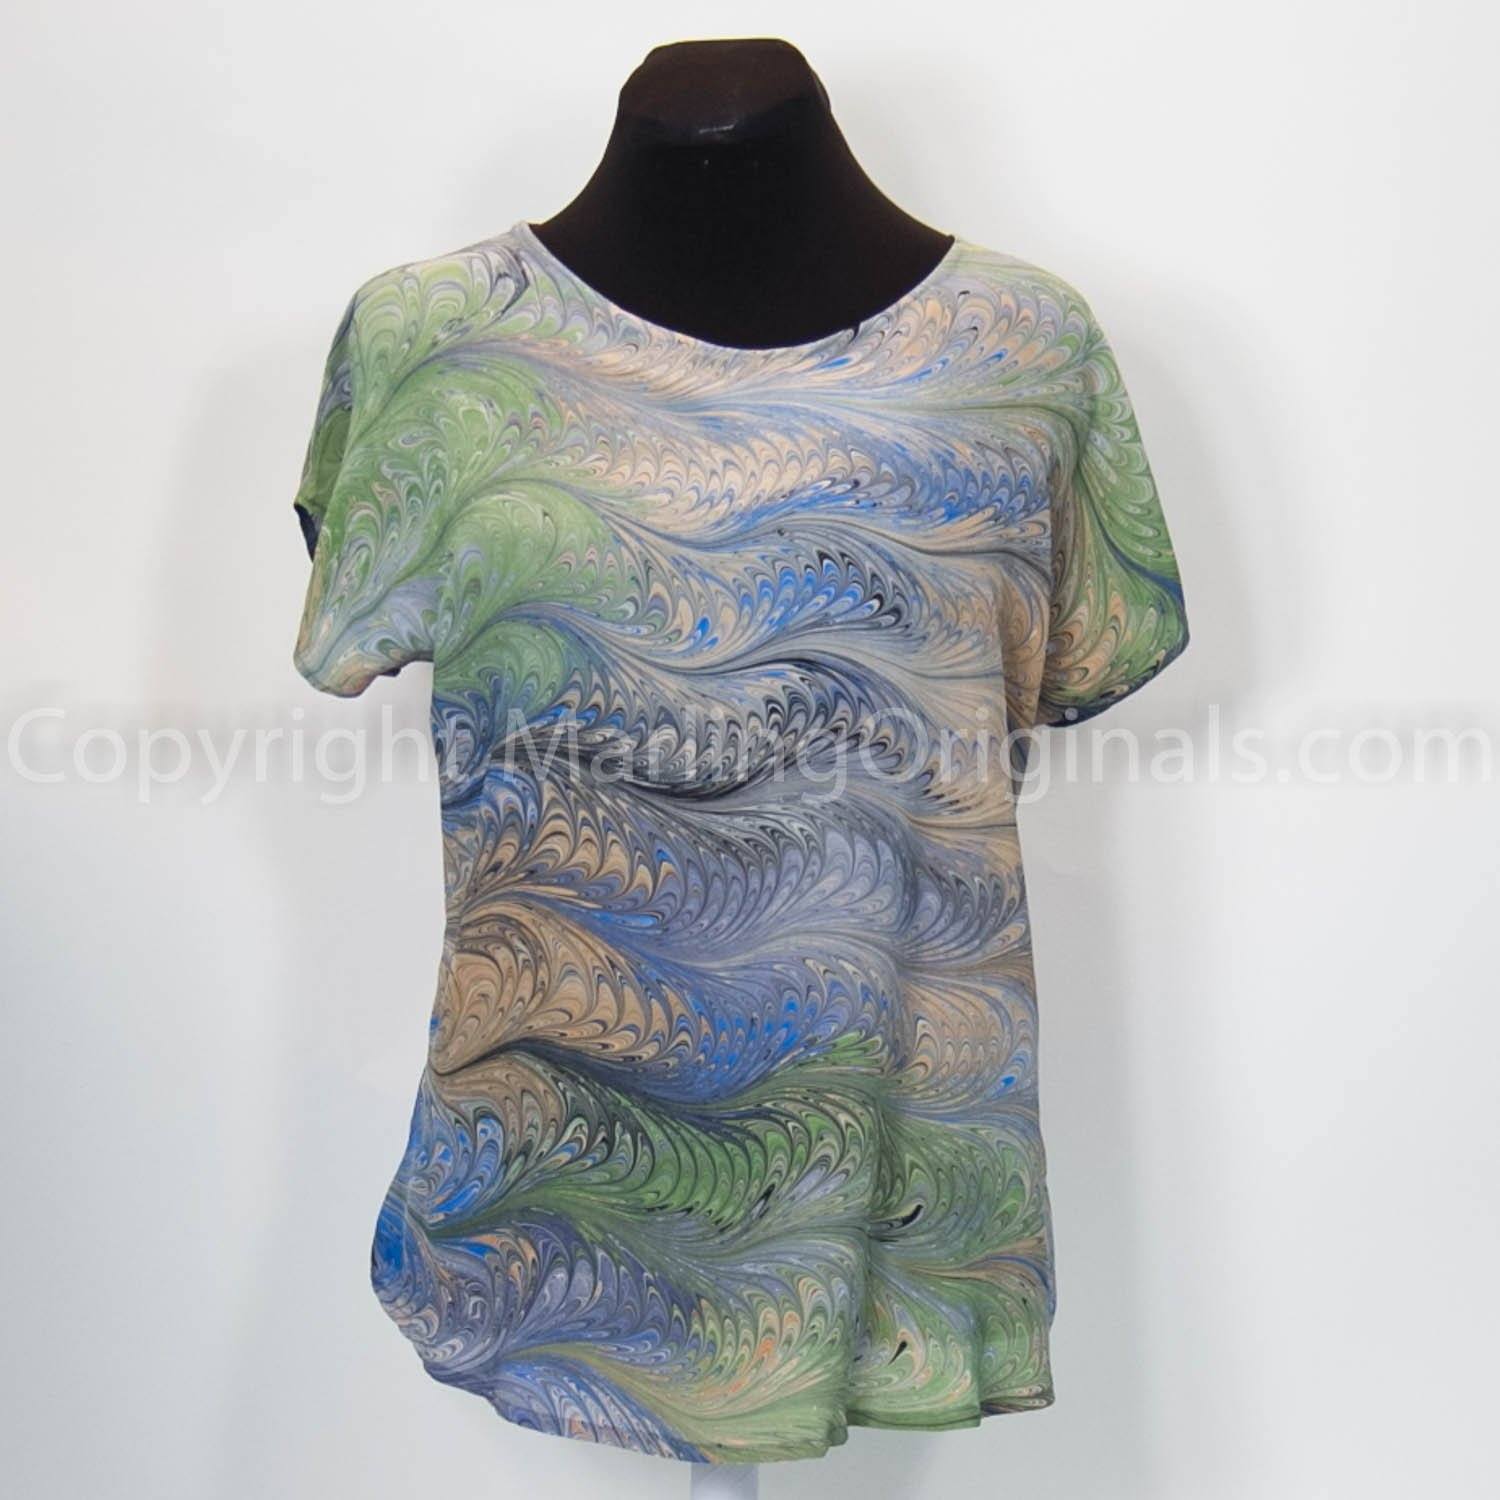 hand marbled silk short sleeve blouse in grey, celery, blue and peach.  Short sleeve with round neck